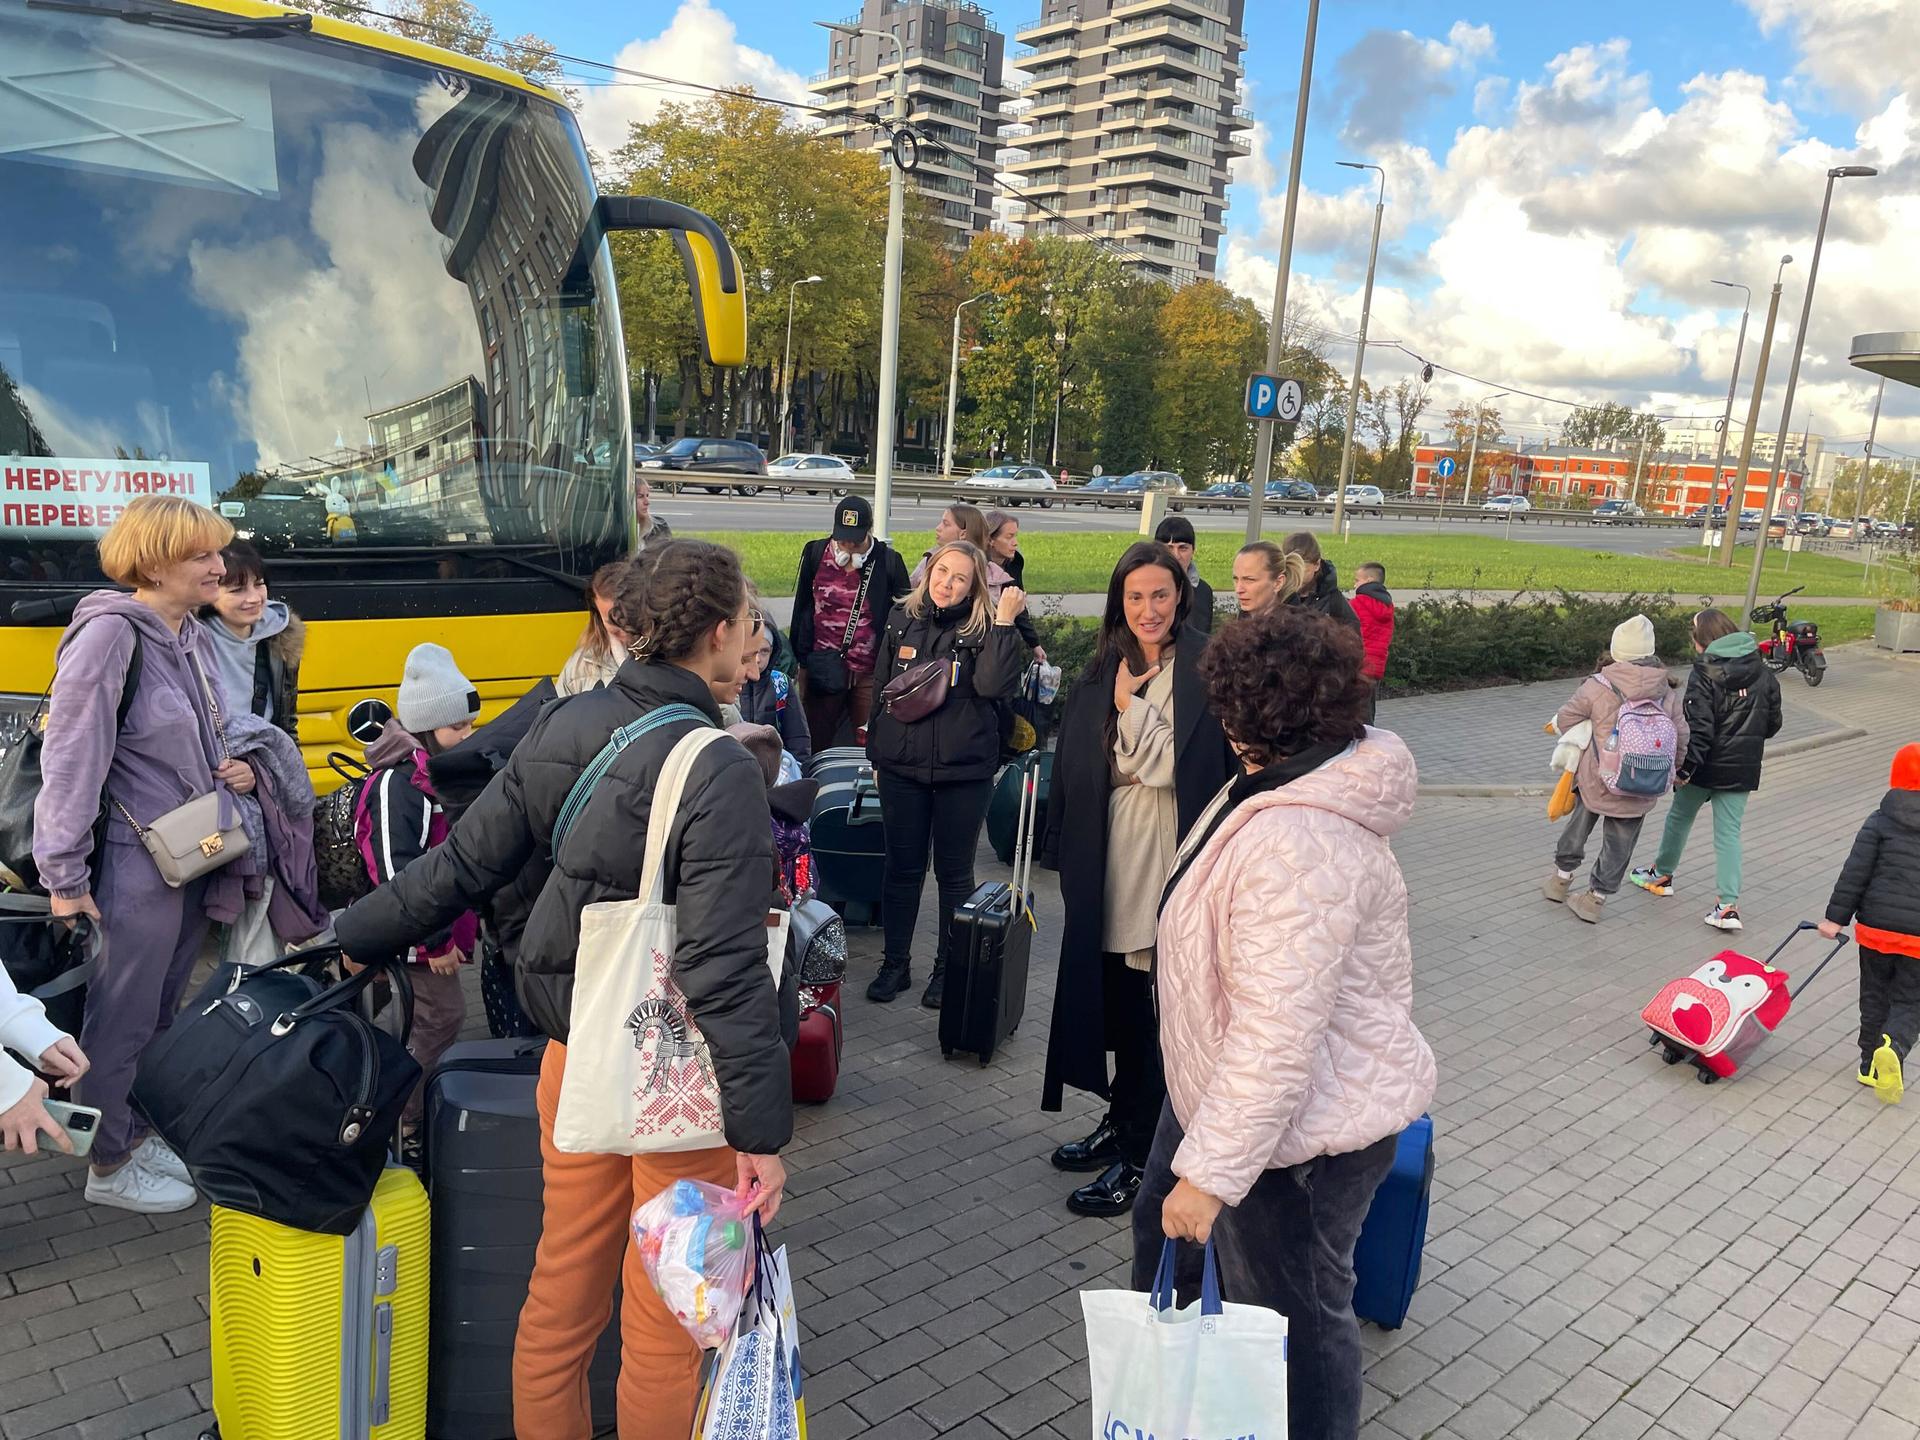 Diana Klimcenko, with the Children’s Hospital Foundation, meets a new group of families after a 30-hour bus ride from Ukraine to Latvia.